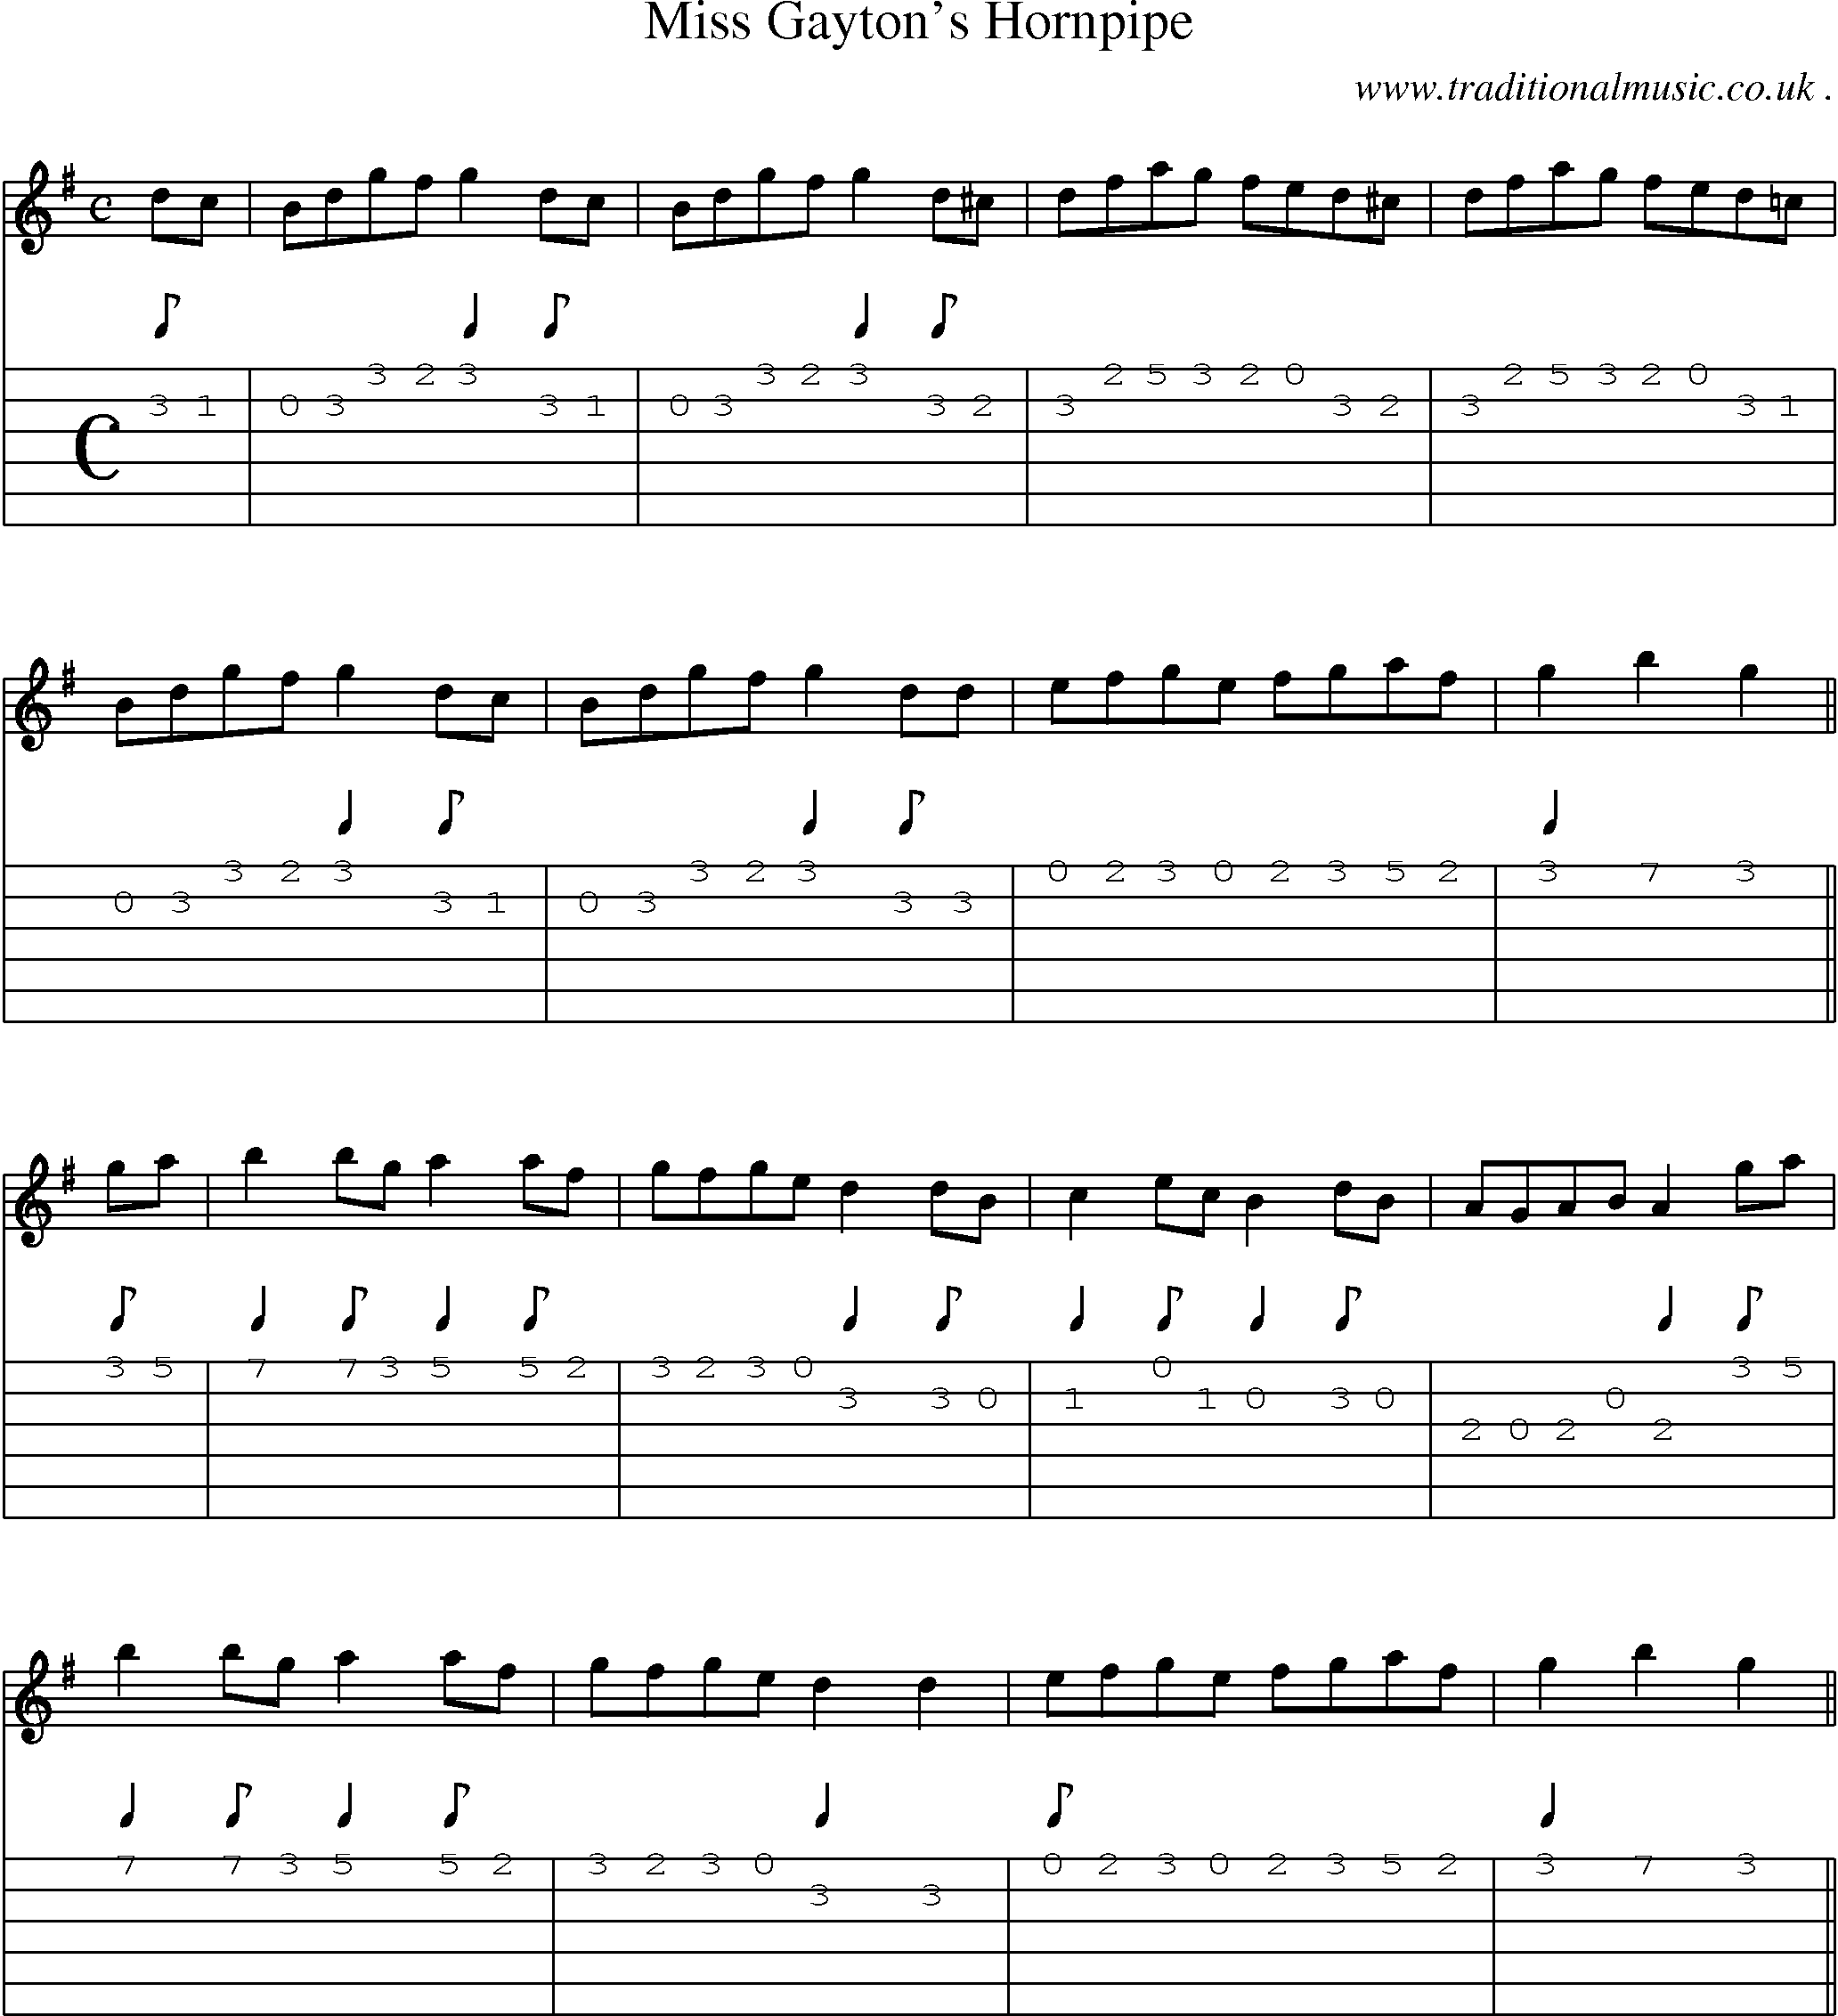 Sheet-music  score, Chords and Guitar Tabs for Miss Gaytons Hornpipe